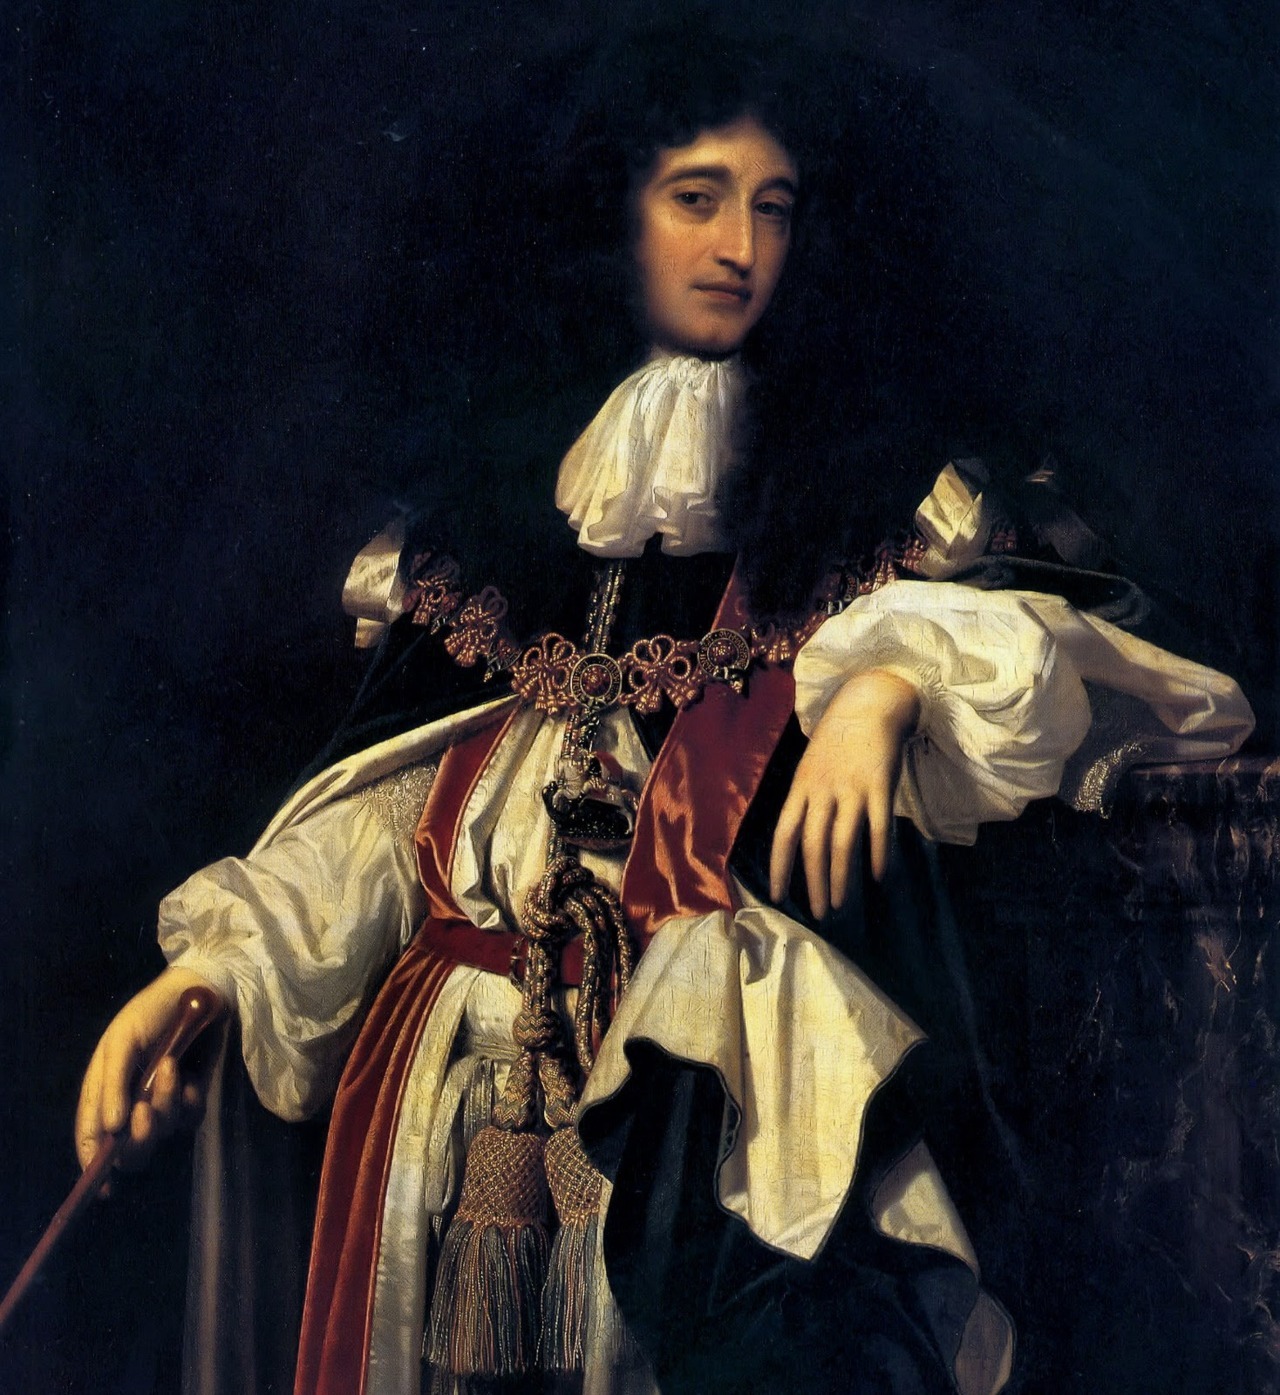 Baroque Supplement:
fuckyeahhistorycrushes:
“ Prince Rupert of the Rhine (1719-1682).
The most brilliant young general of the English Civil Wars: if the King had listened to him, he’d have won quite early on. He was very tall (even taller than his...